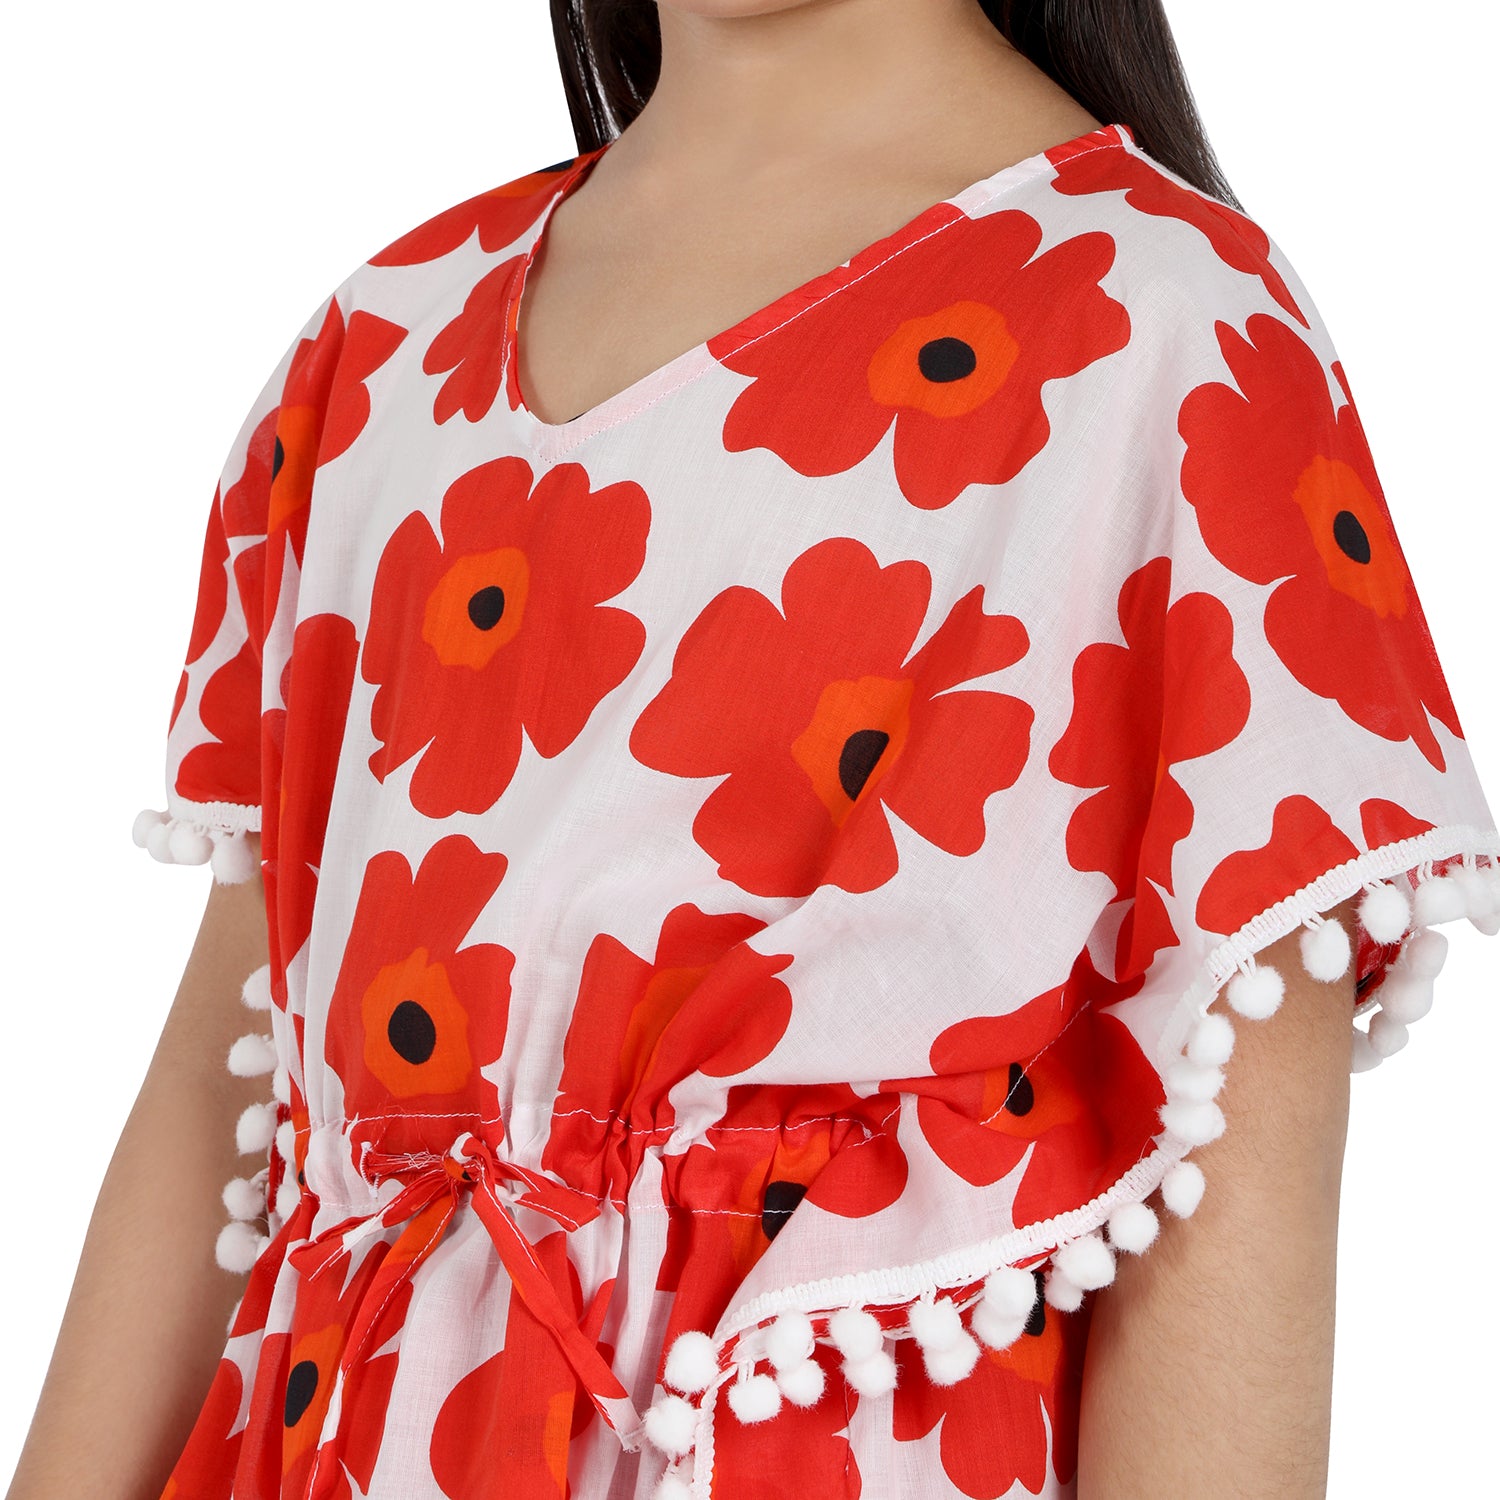 Red Flowers- Cover ups